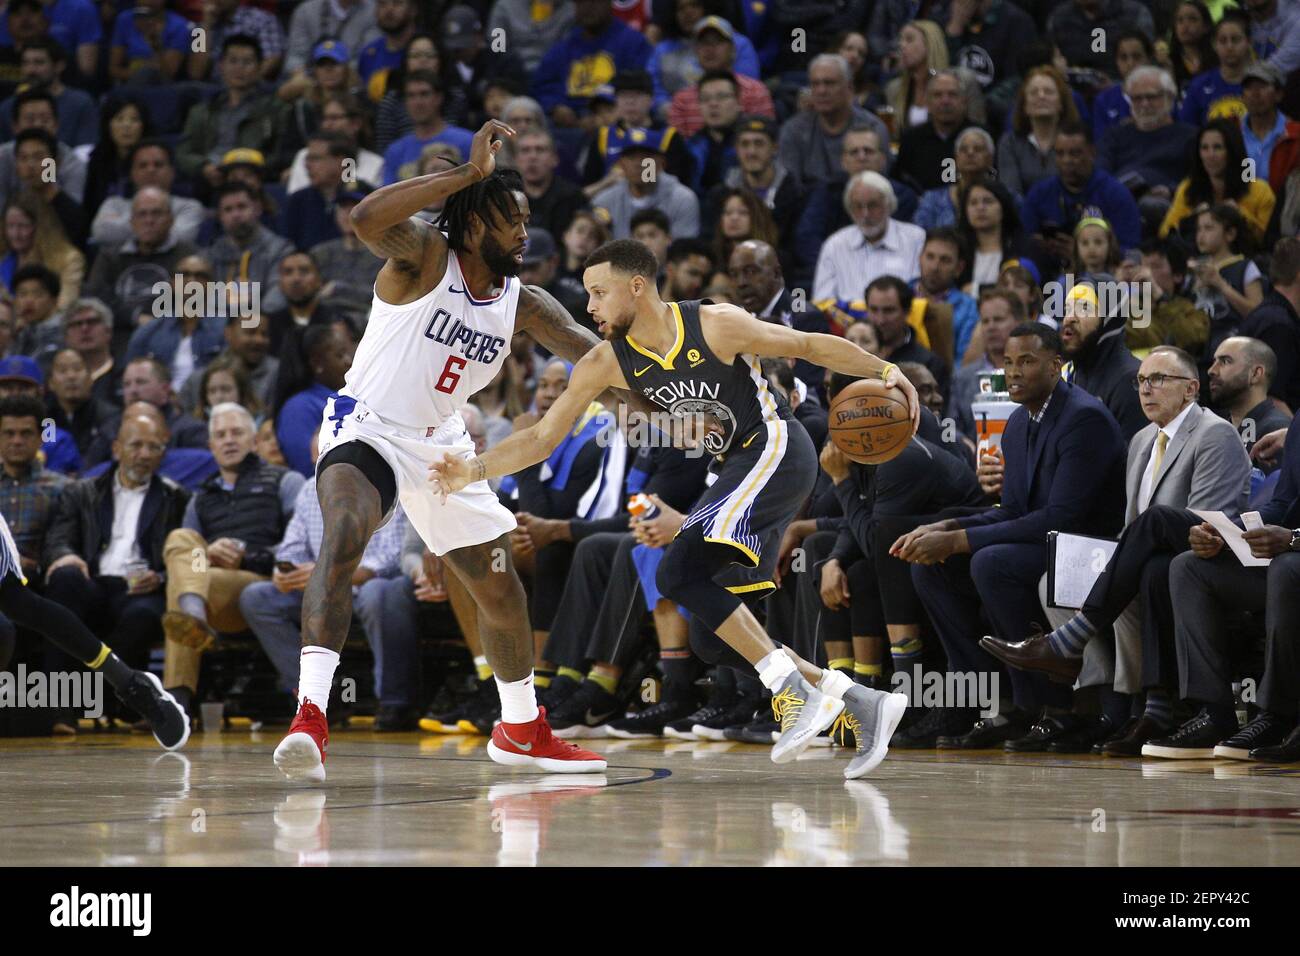 Feb 22, 2018; Oakland, CA, USA; Golden State Warriors guard Stephen Curry  (30) dribbles against Los Angeles Clippers center DeAndre Jordan (6) in the  second quarter at Oracle Arena. Mandatory Credit: Cary